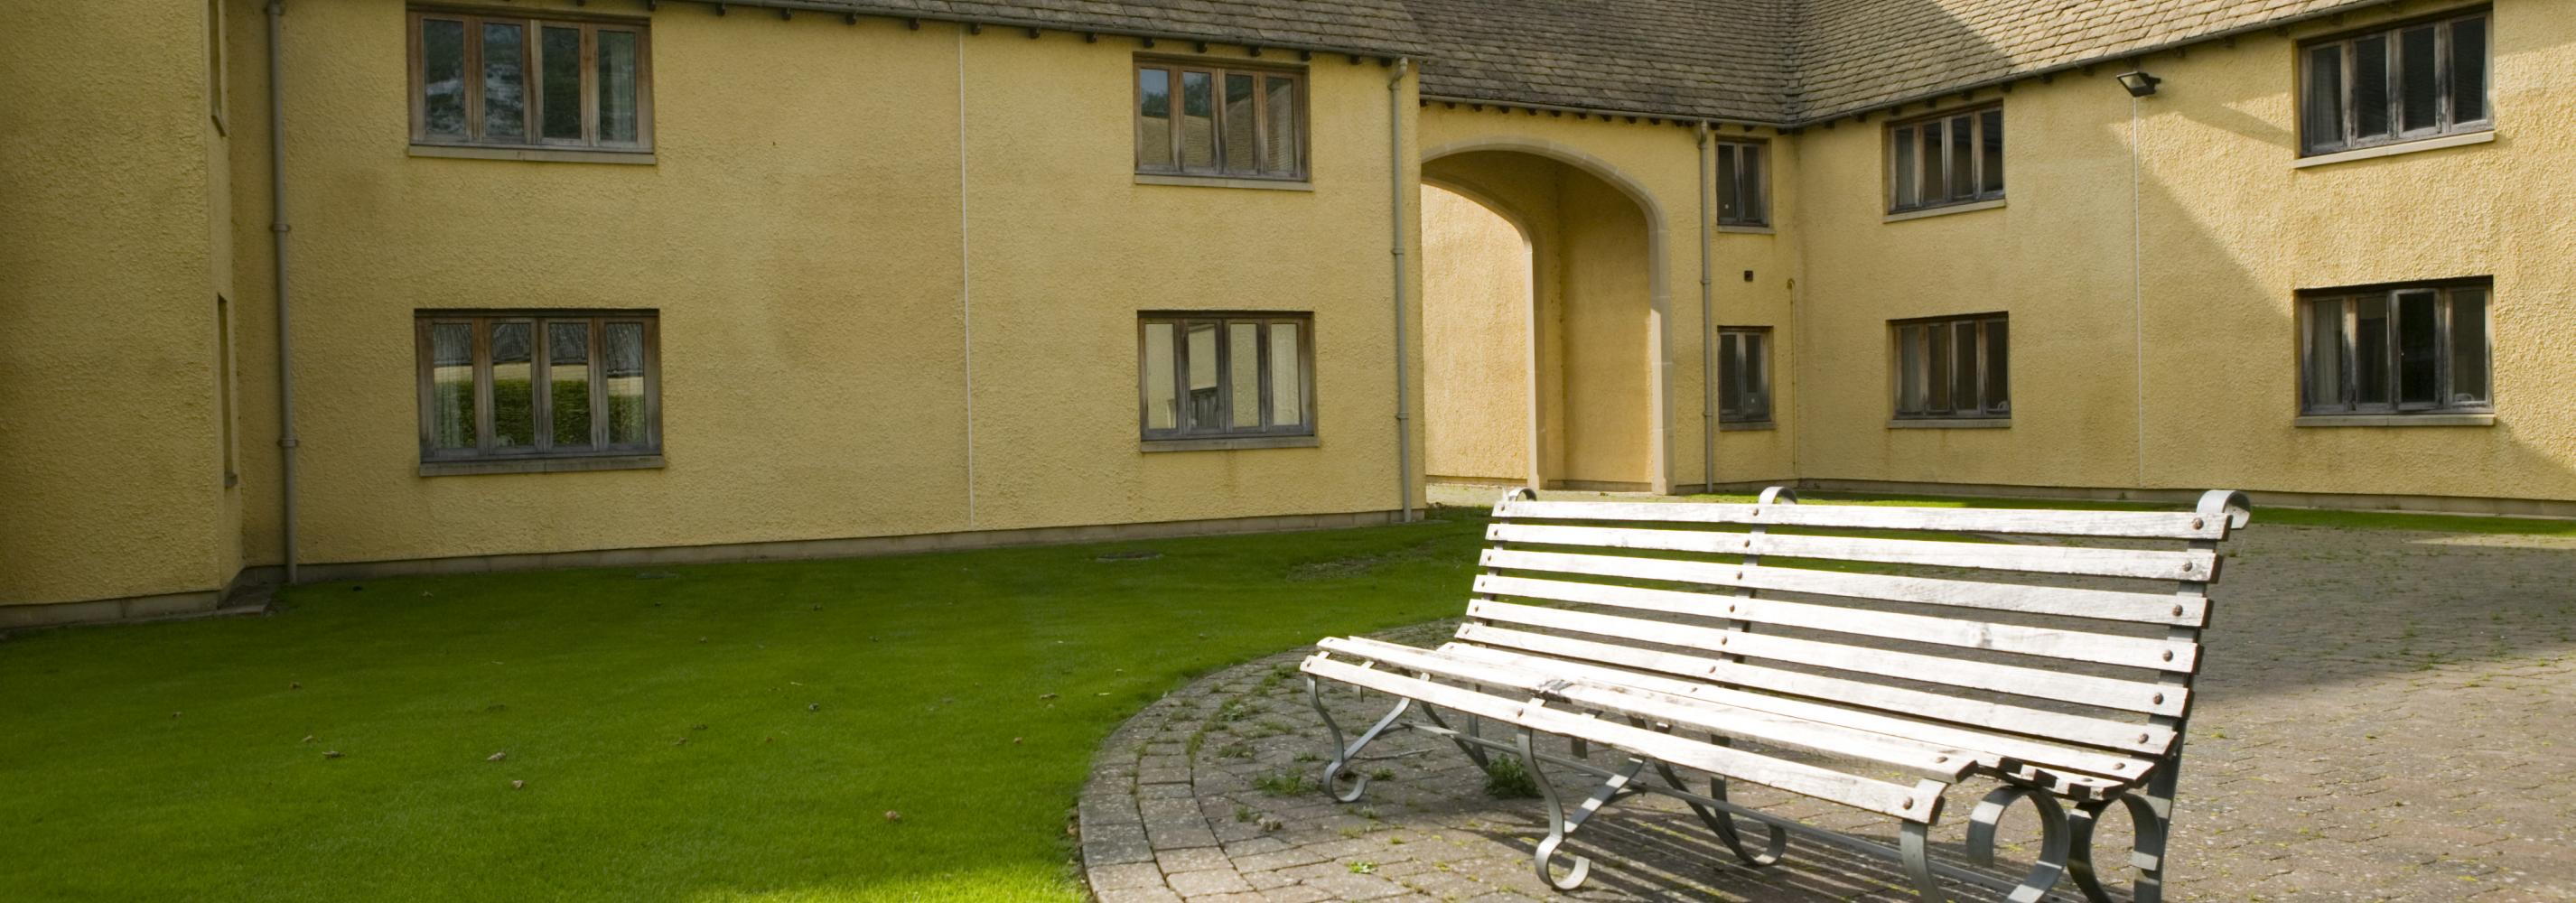 Exterior of building with a courtyard and a bench